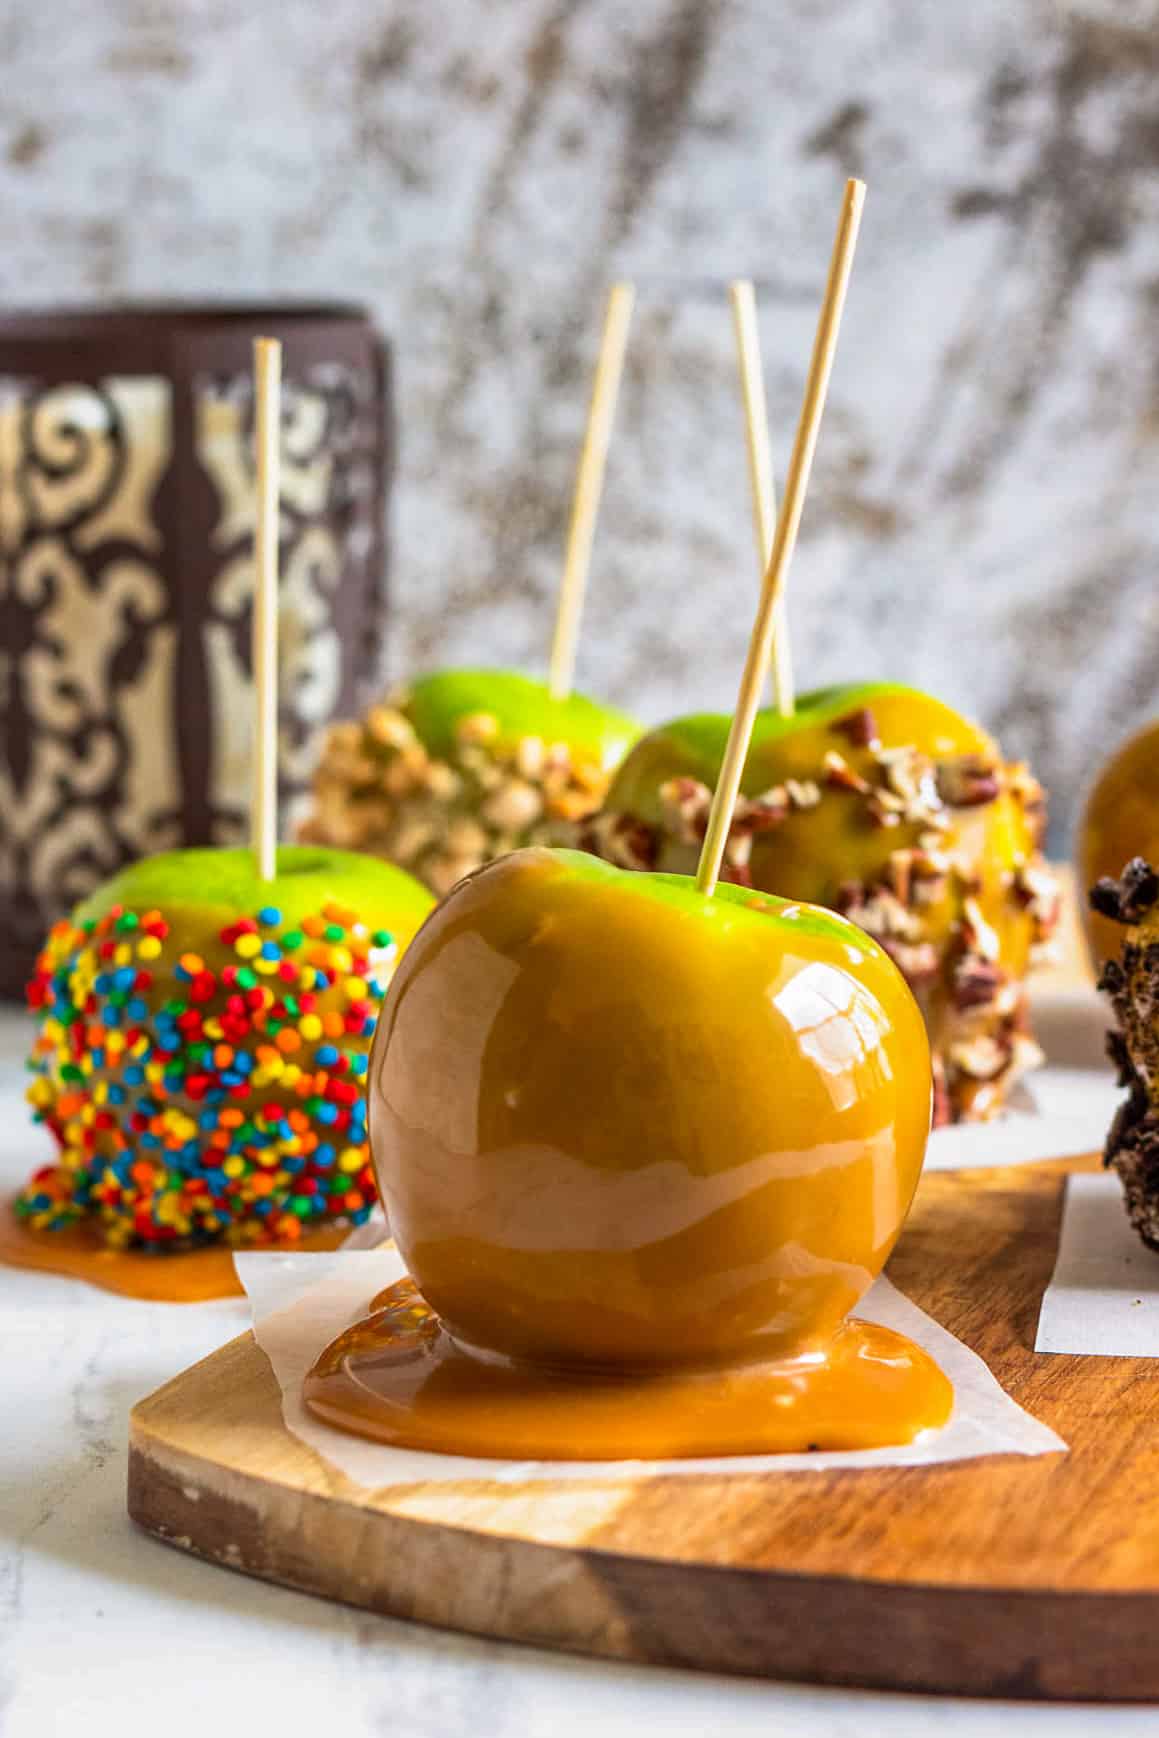 caramel apples on serving tray